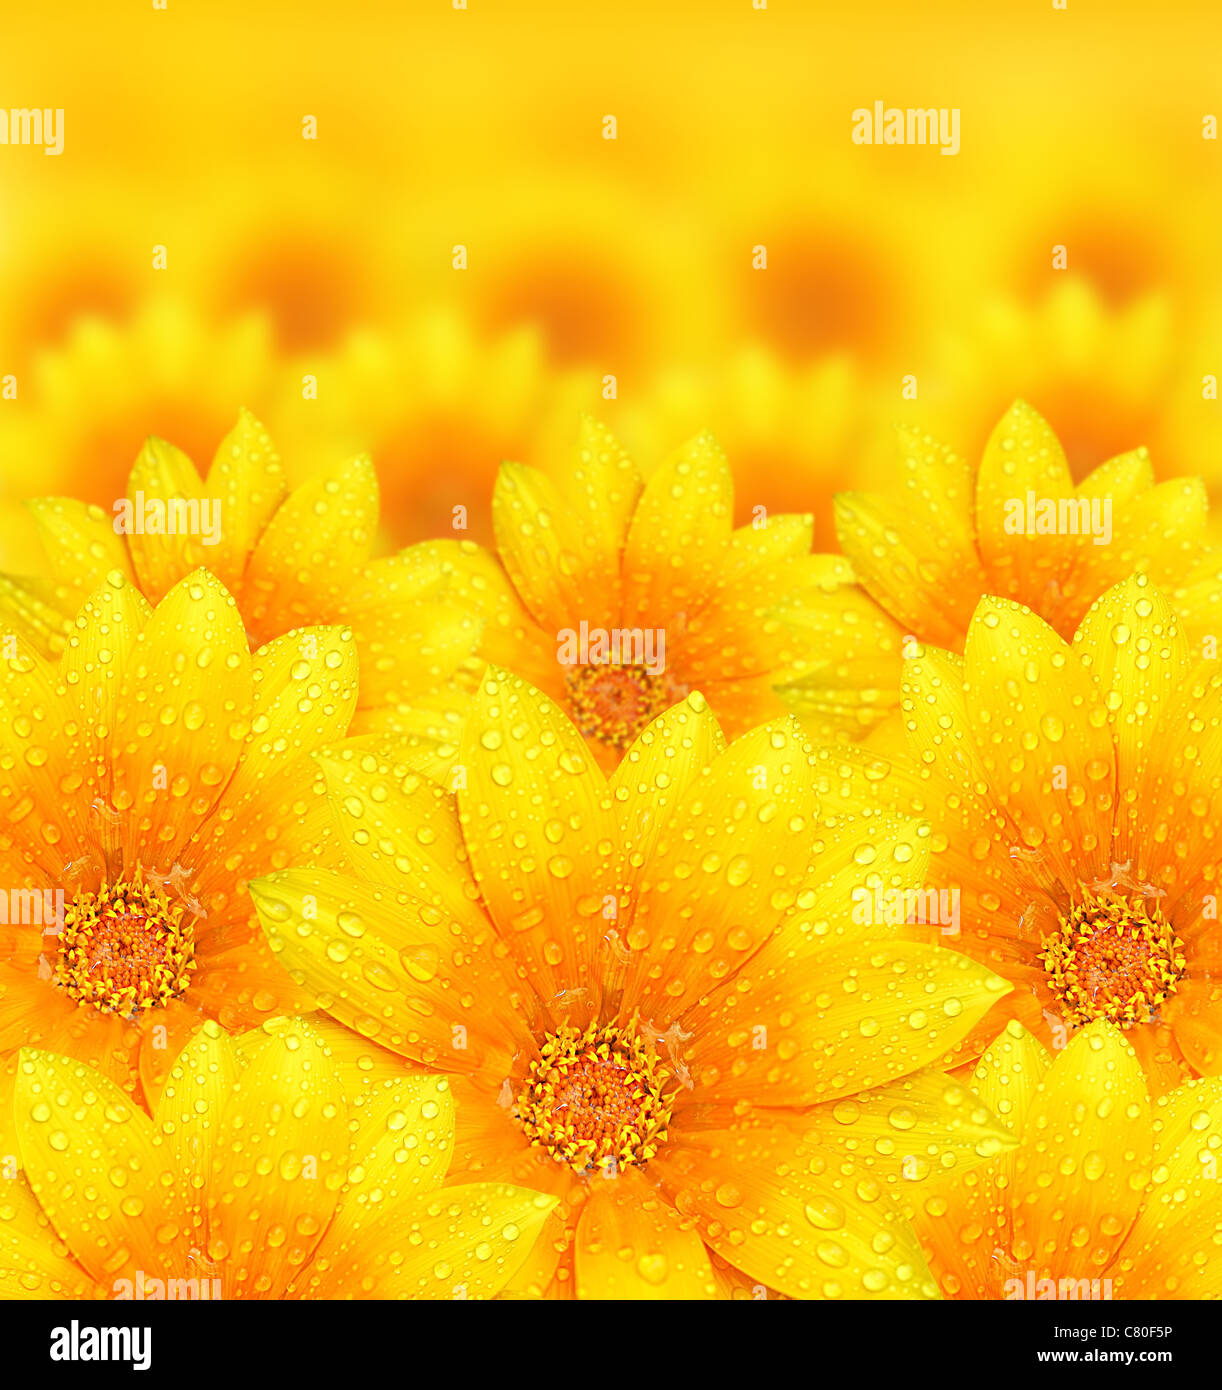 Fresh yellow flower background with dew props, beautiful nature concept Stock Photo